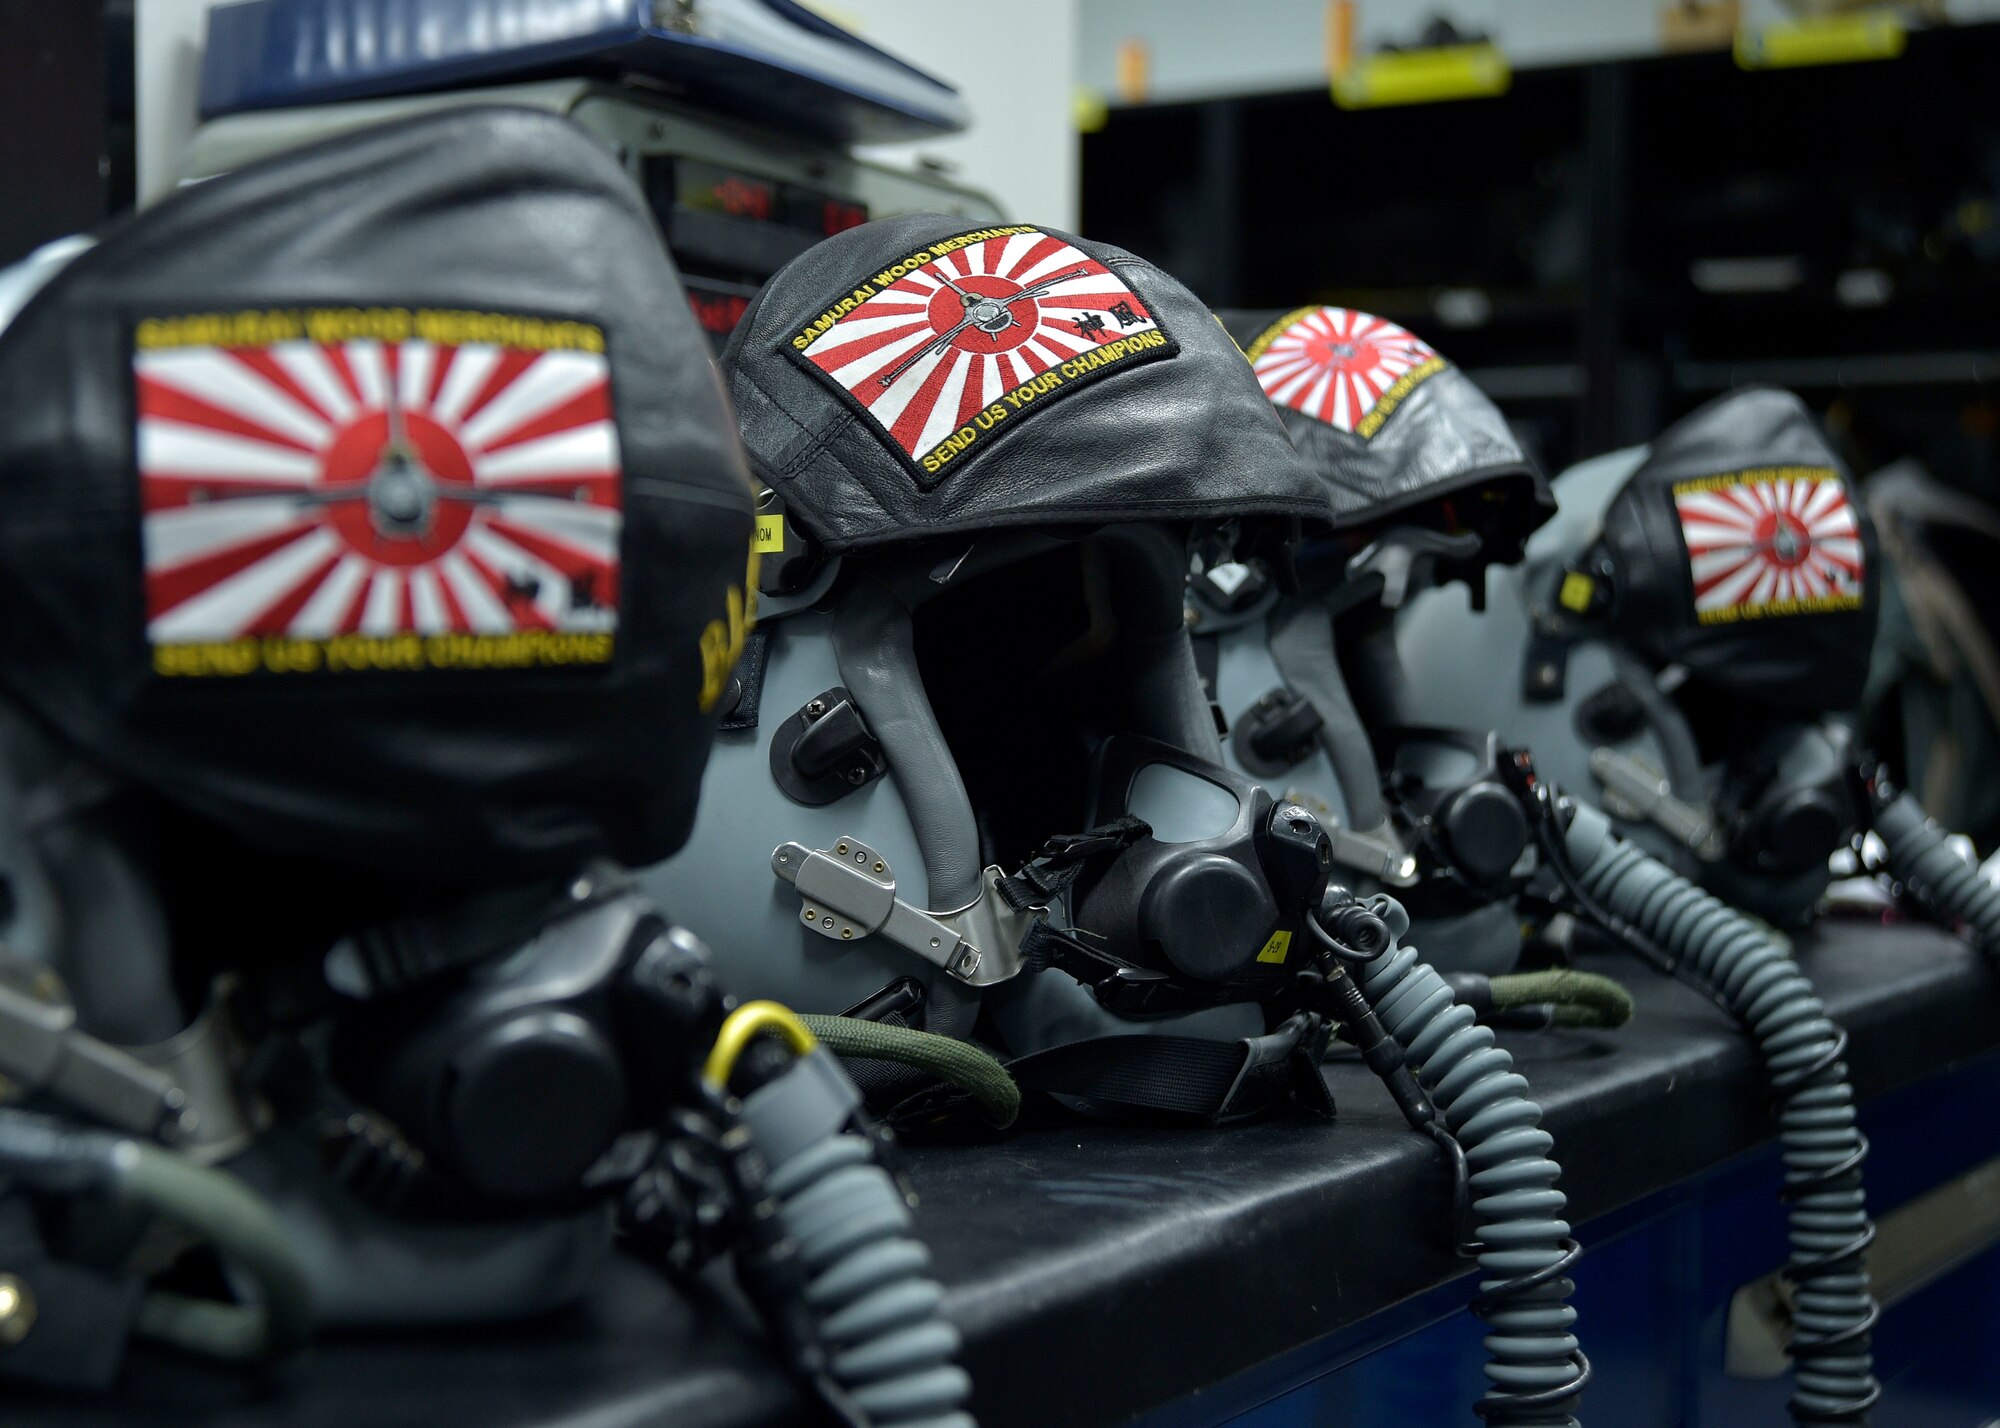 A table full of prepared Joint Helmet Mounted Cueing System helmets and MBU 20/P breathing masks sit in the office of 35th Operations Support Squadron Aircrew Flight Equipment at Misawa Air Base, Japan, March 8, 2016. AFE Airmen conduct pre-checks on all equipment ensuring there are no holes, tears or other discrepancies before the pilots don their gear. The helmet and breathing masks supply oxygen to the pilots while they are flying at high altitudes. (U.S. Air Force photo by Senior Airman Deana Heitzman)